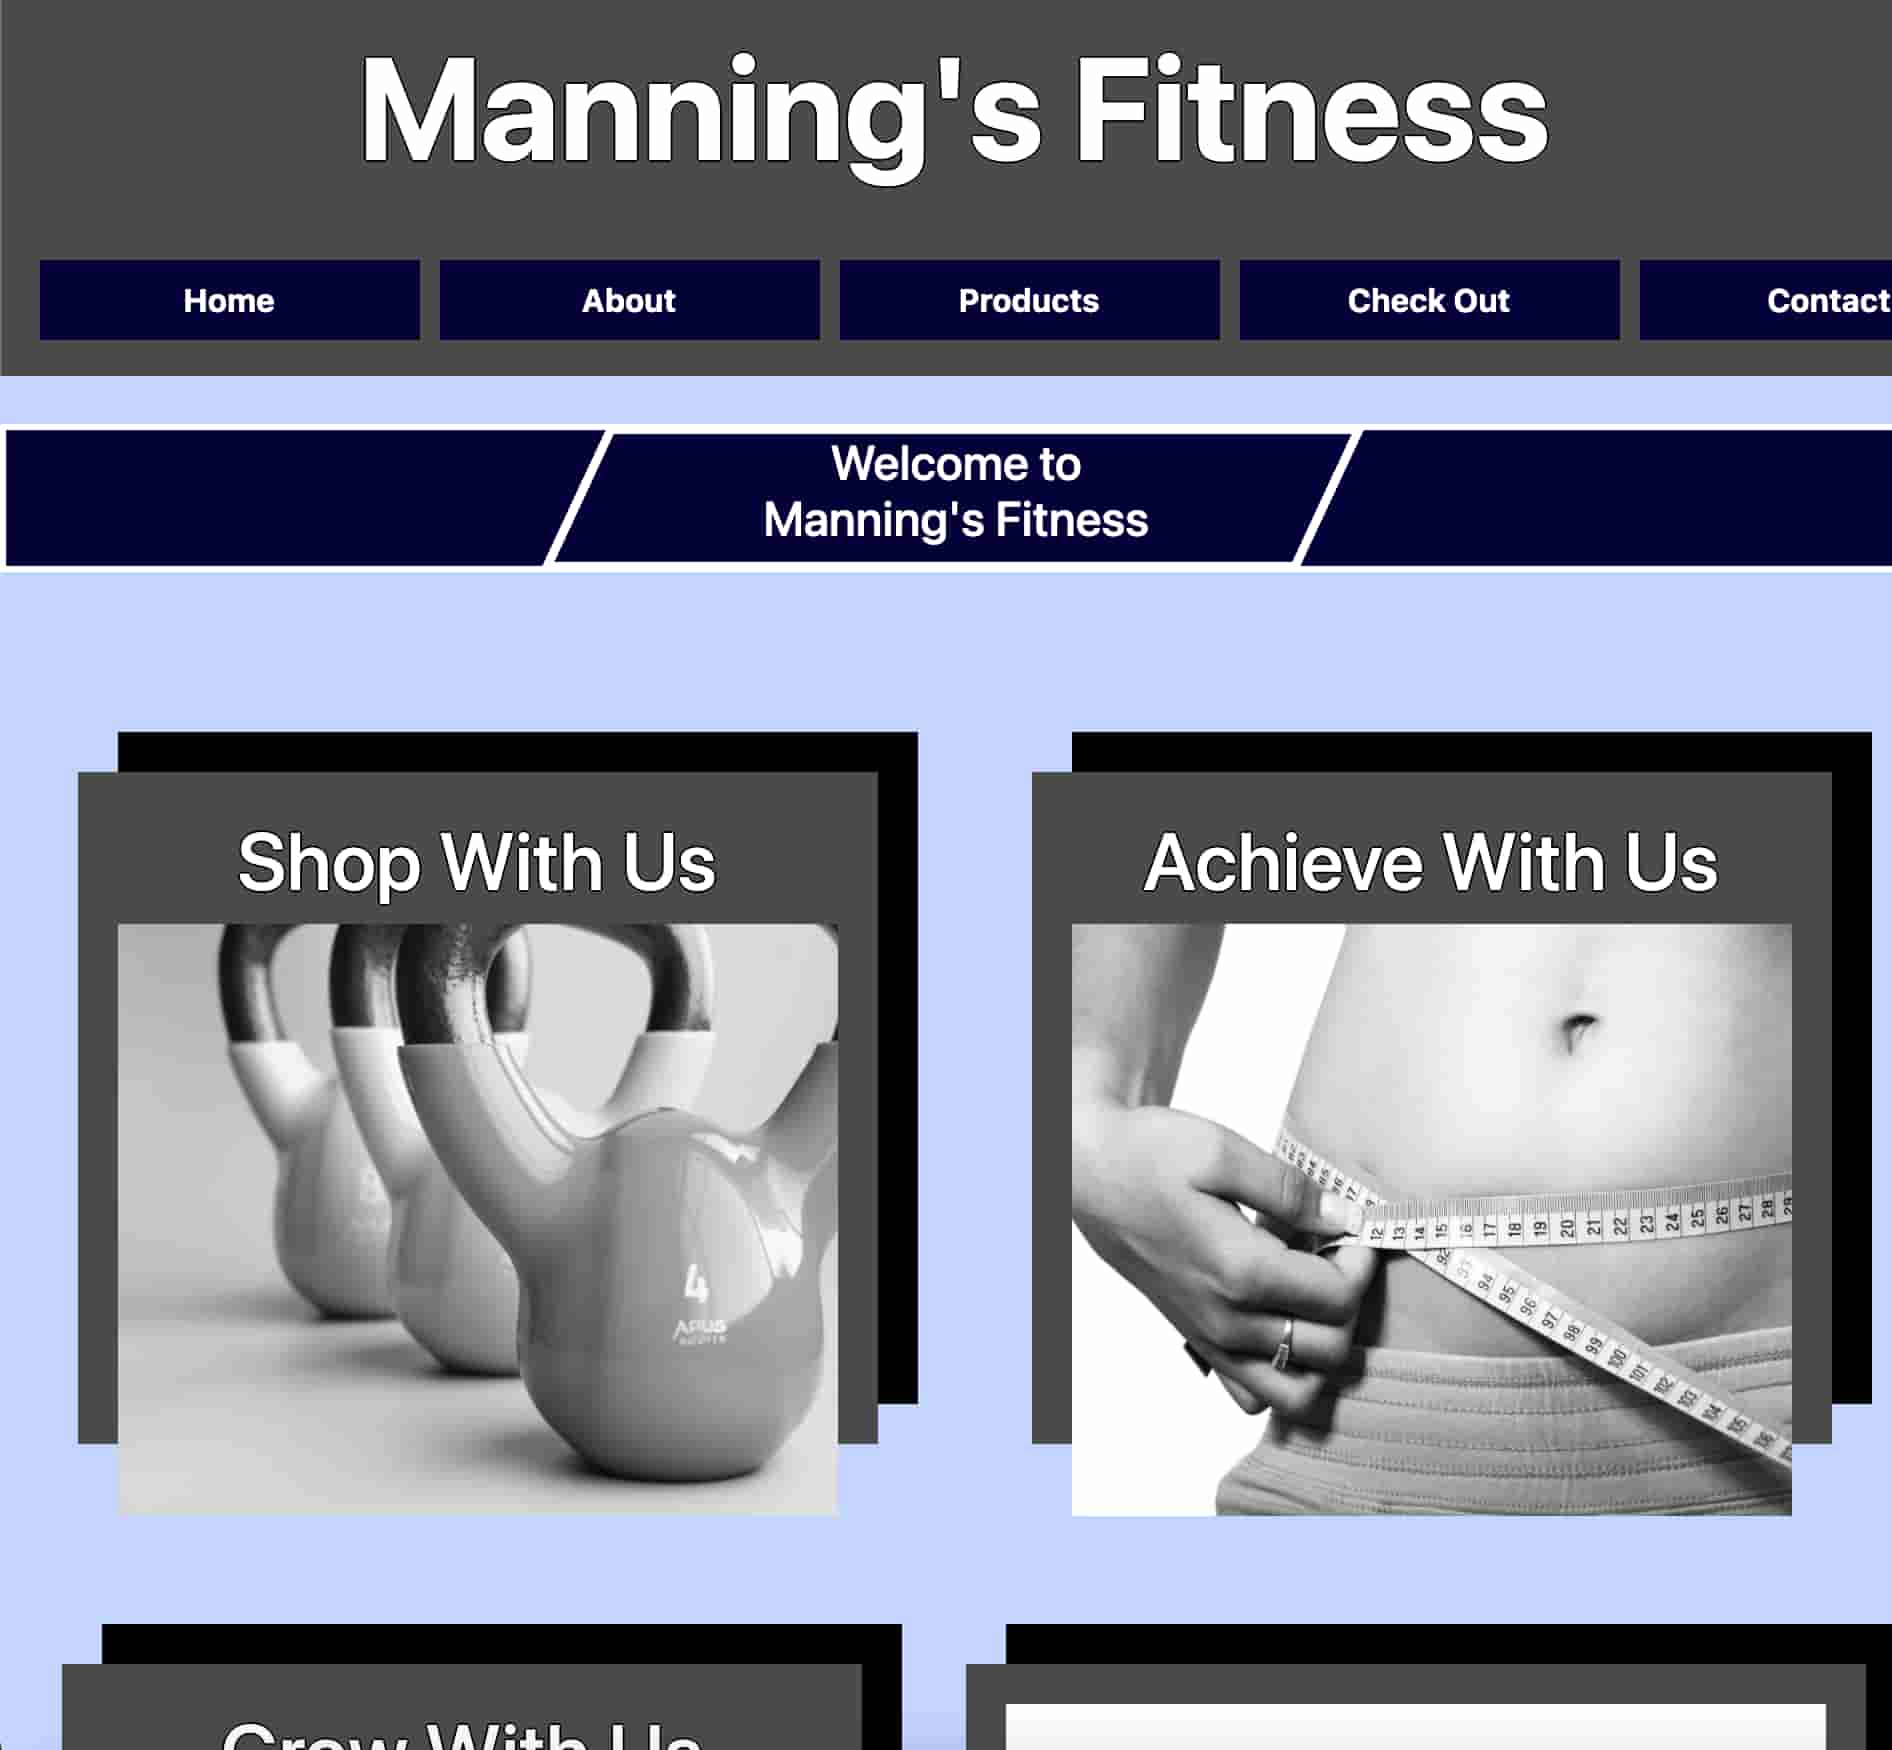 Manning's Fitness Wireframe